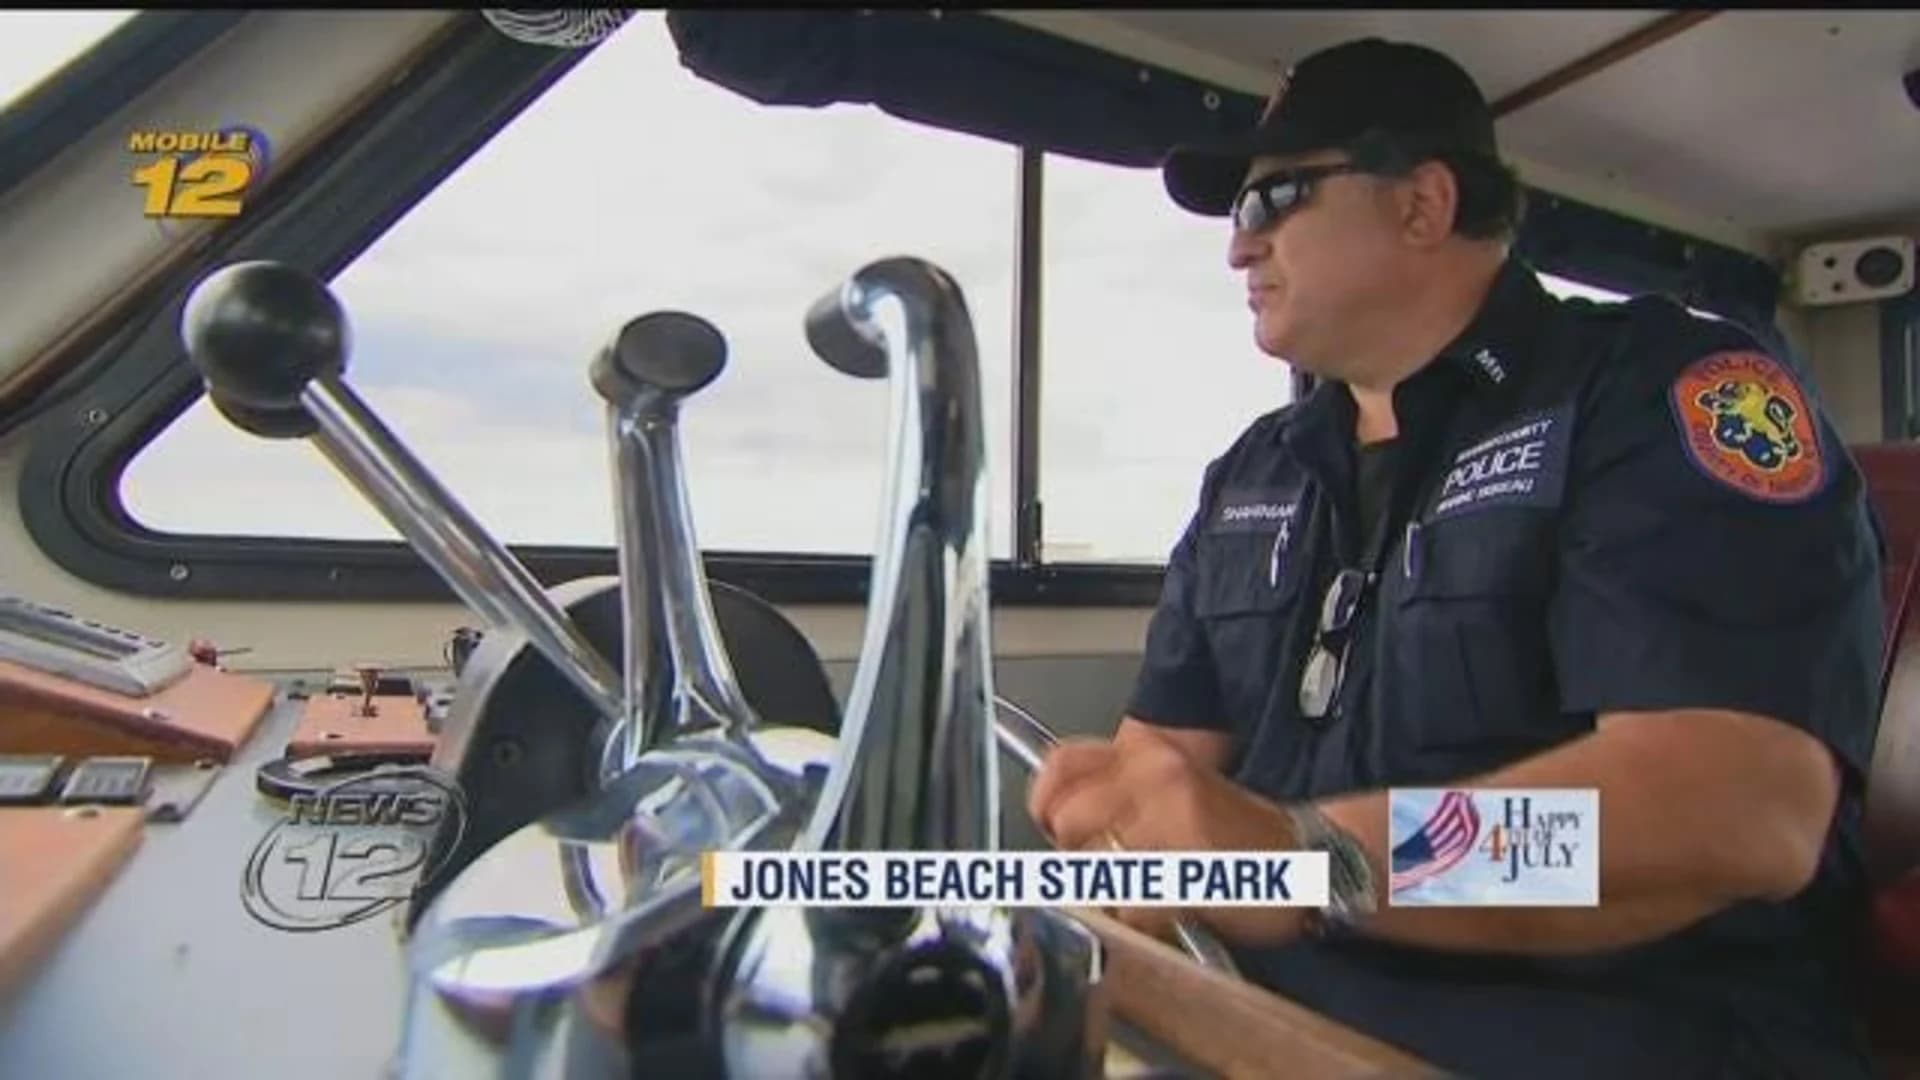 Nassau police step up patrols to deter reckless boating, BWI